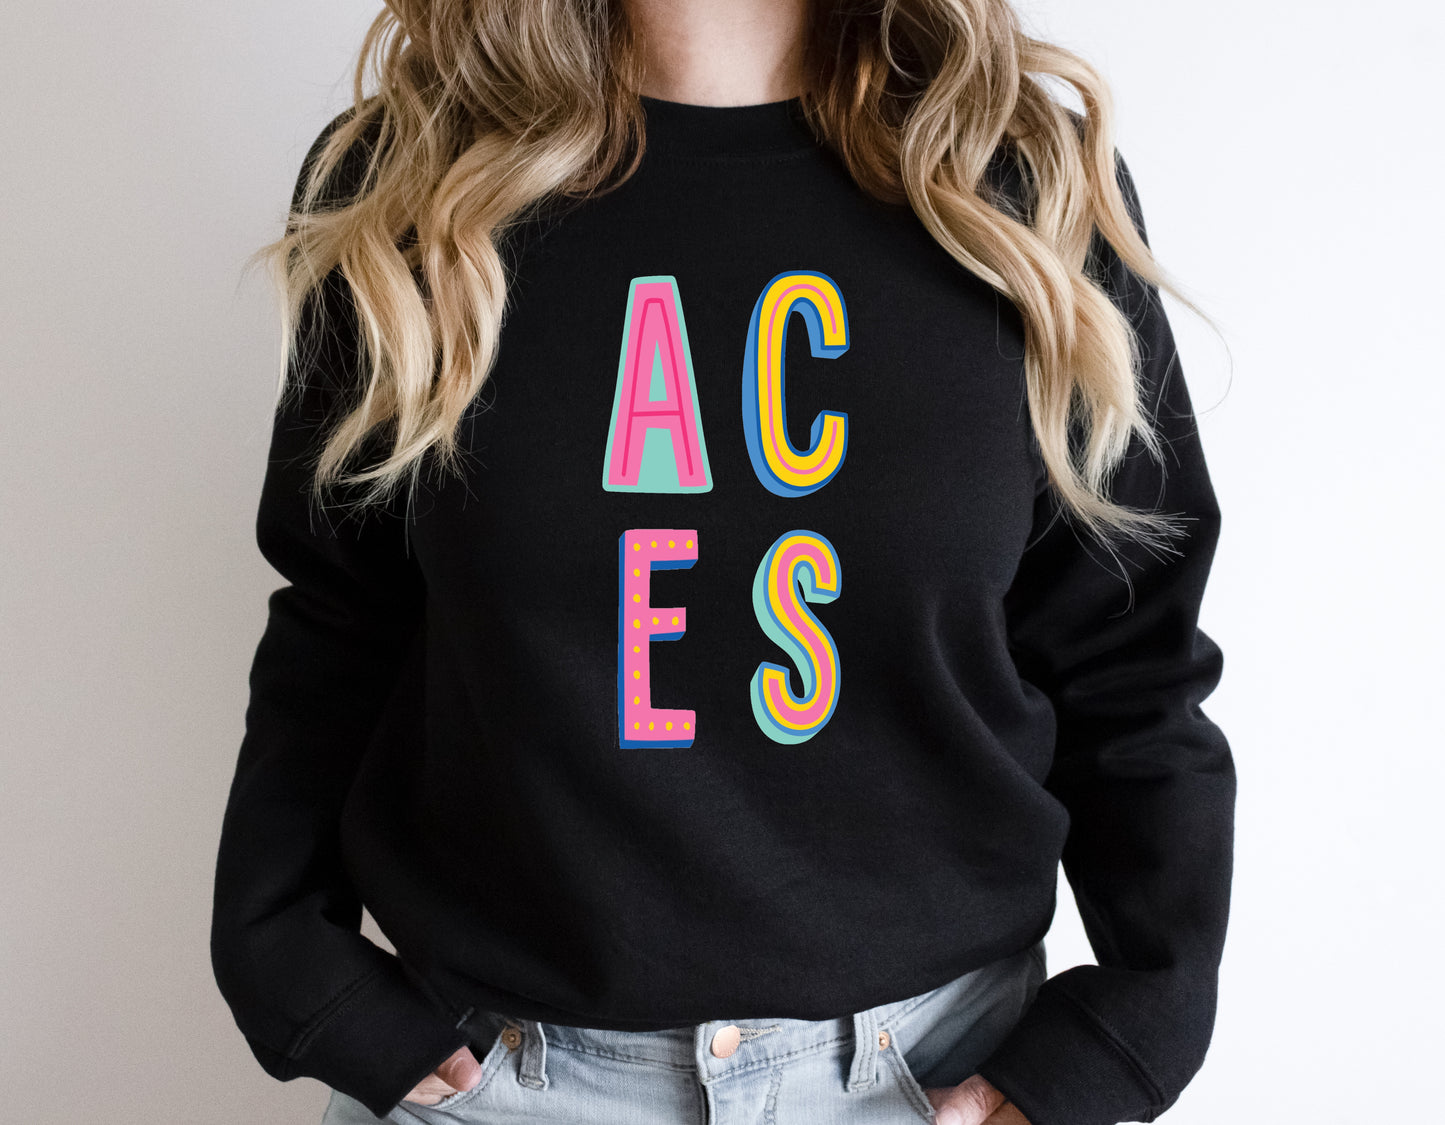 ACES Colorful Graphic Tee